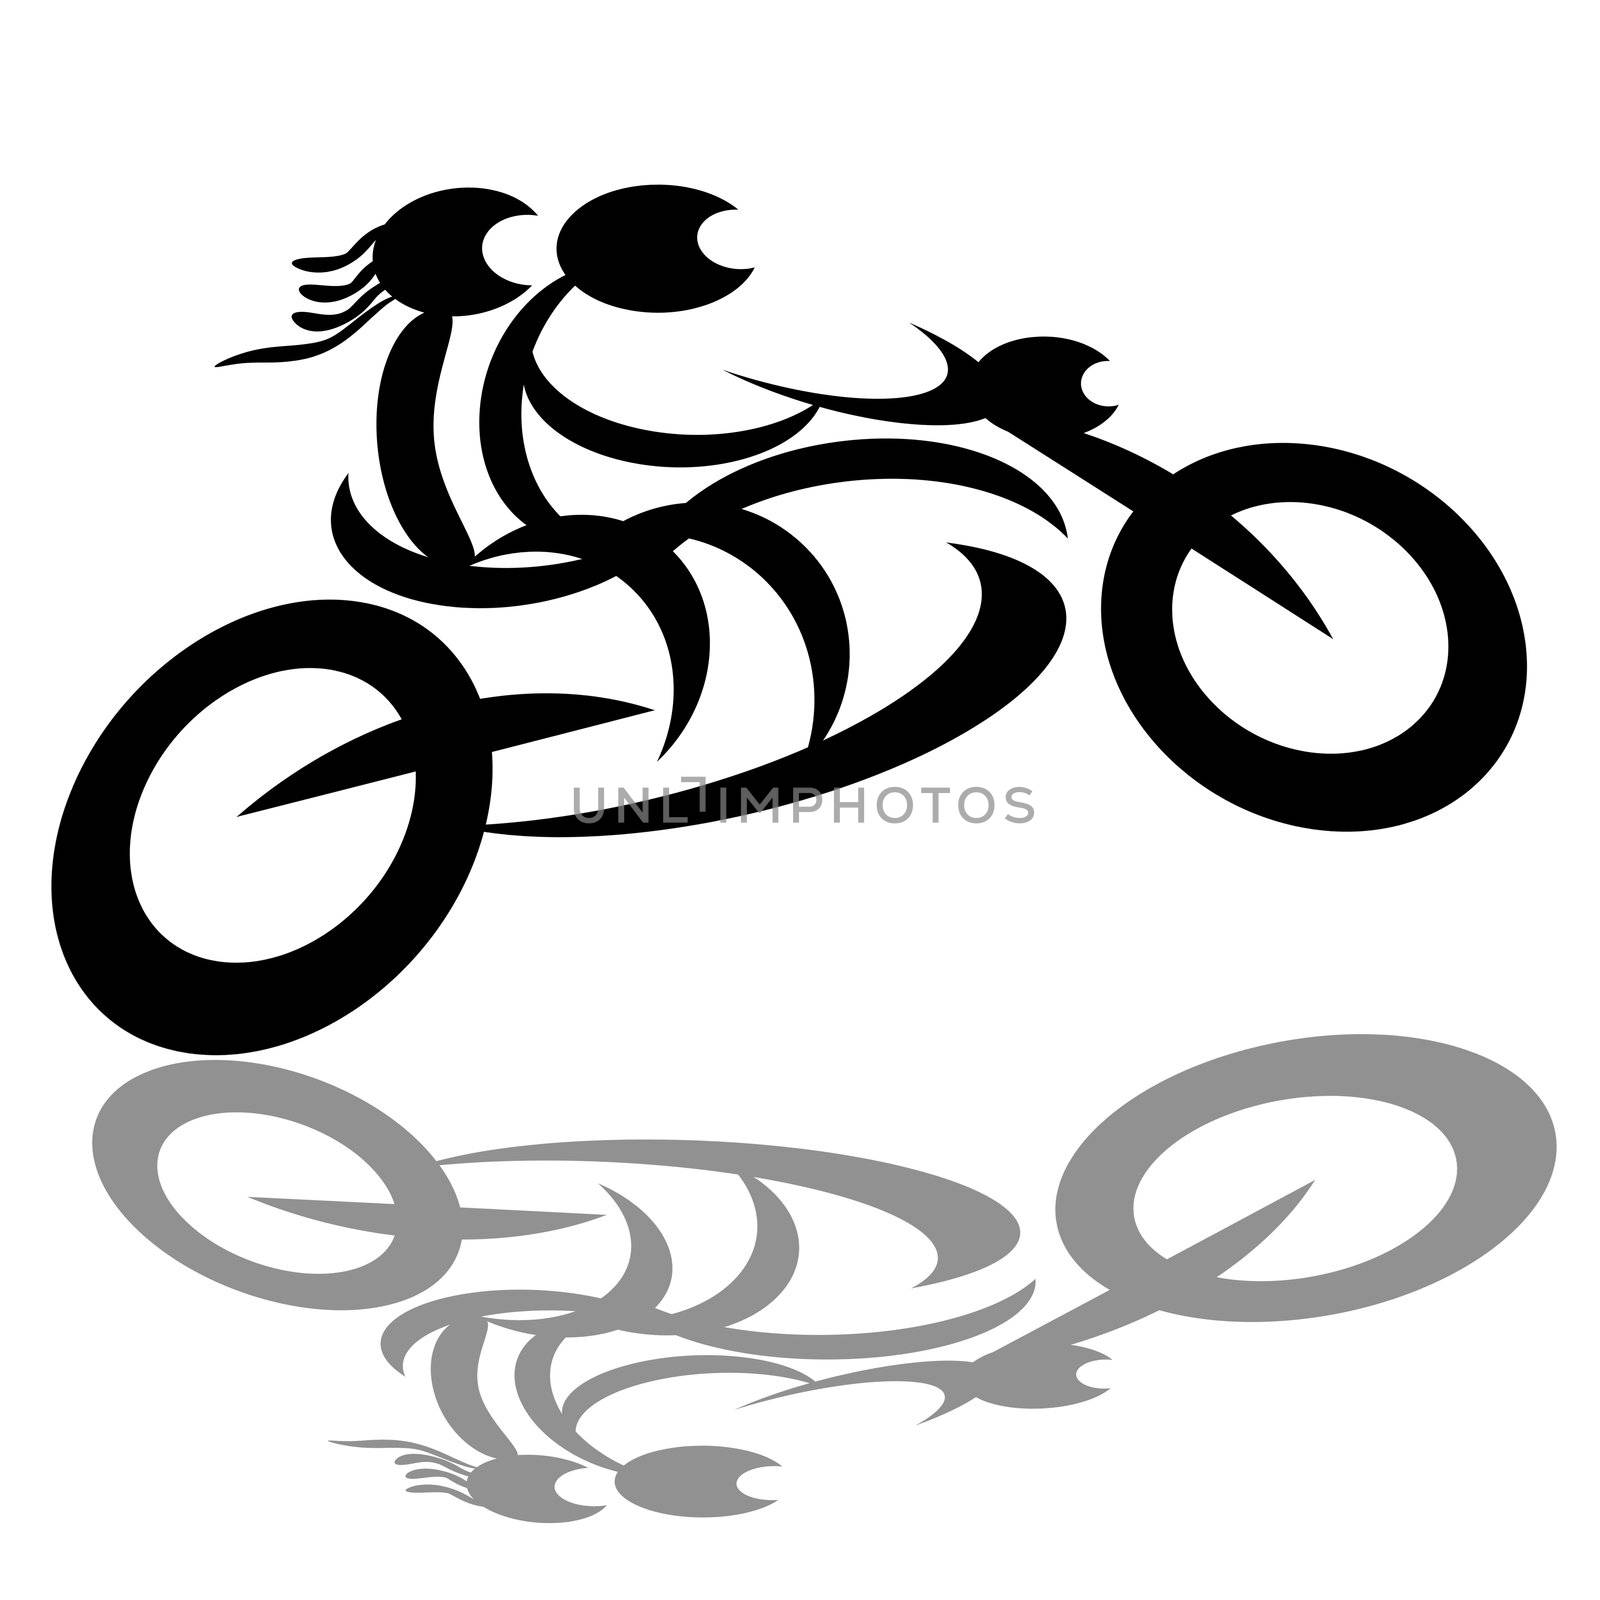 Biker couple extremely ride motorcycle, black silhouette isolated over white background